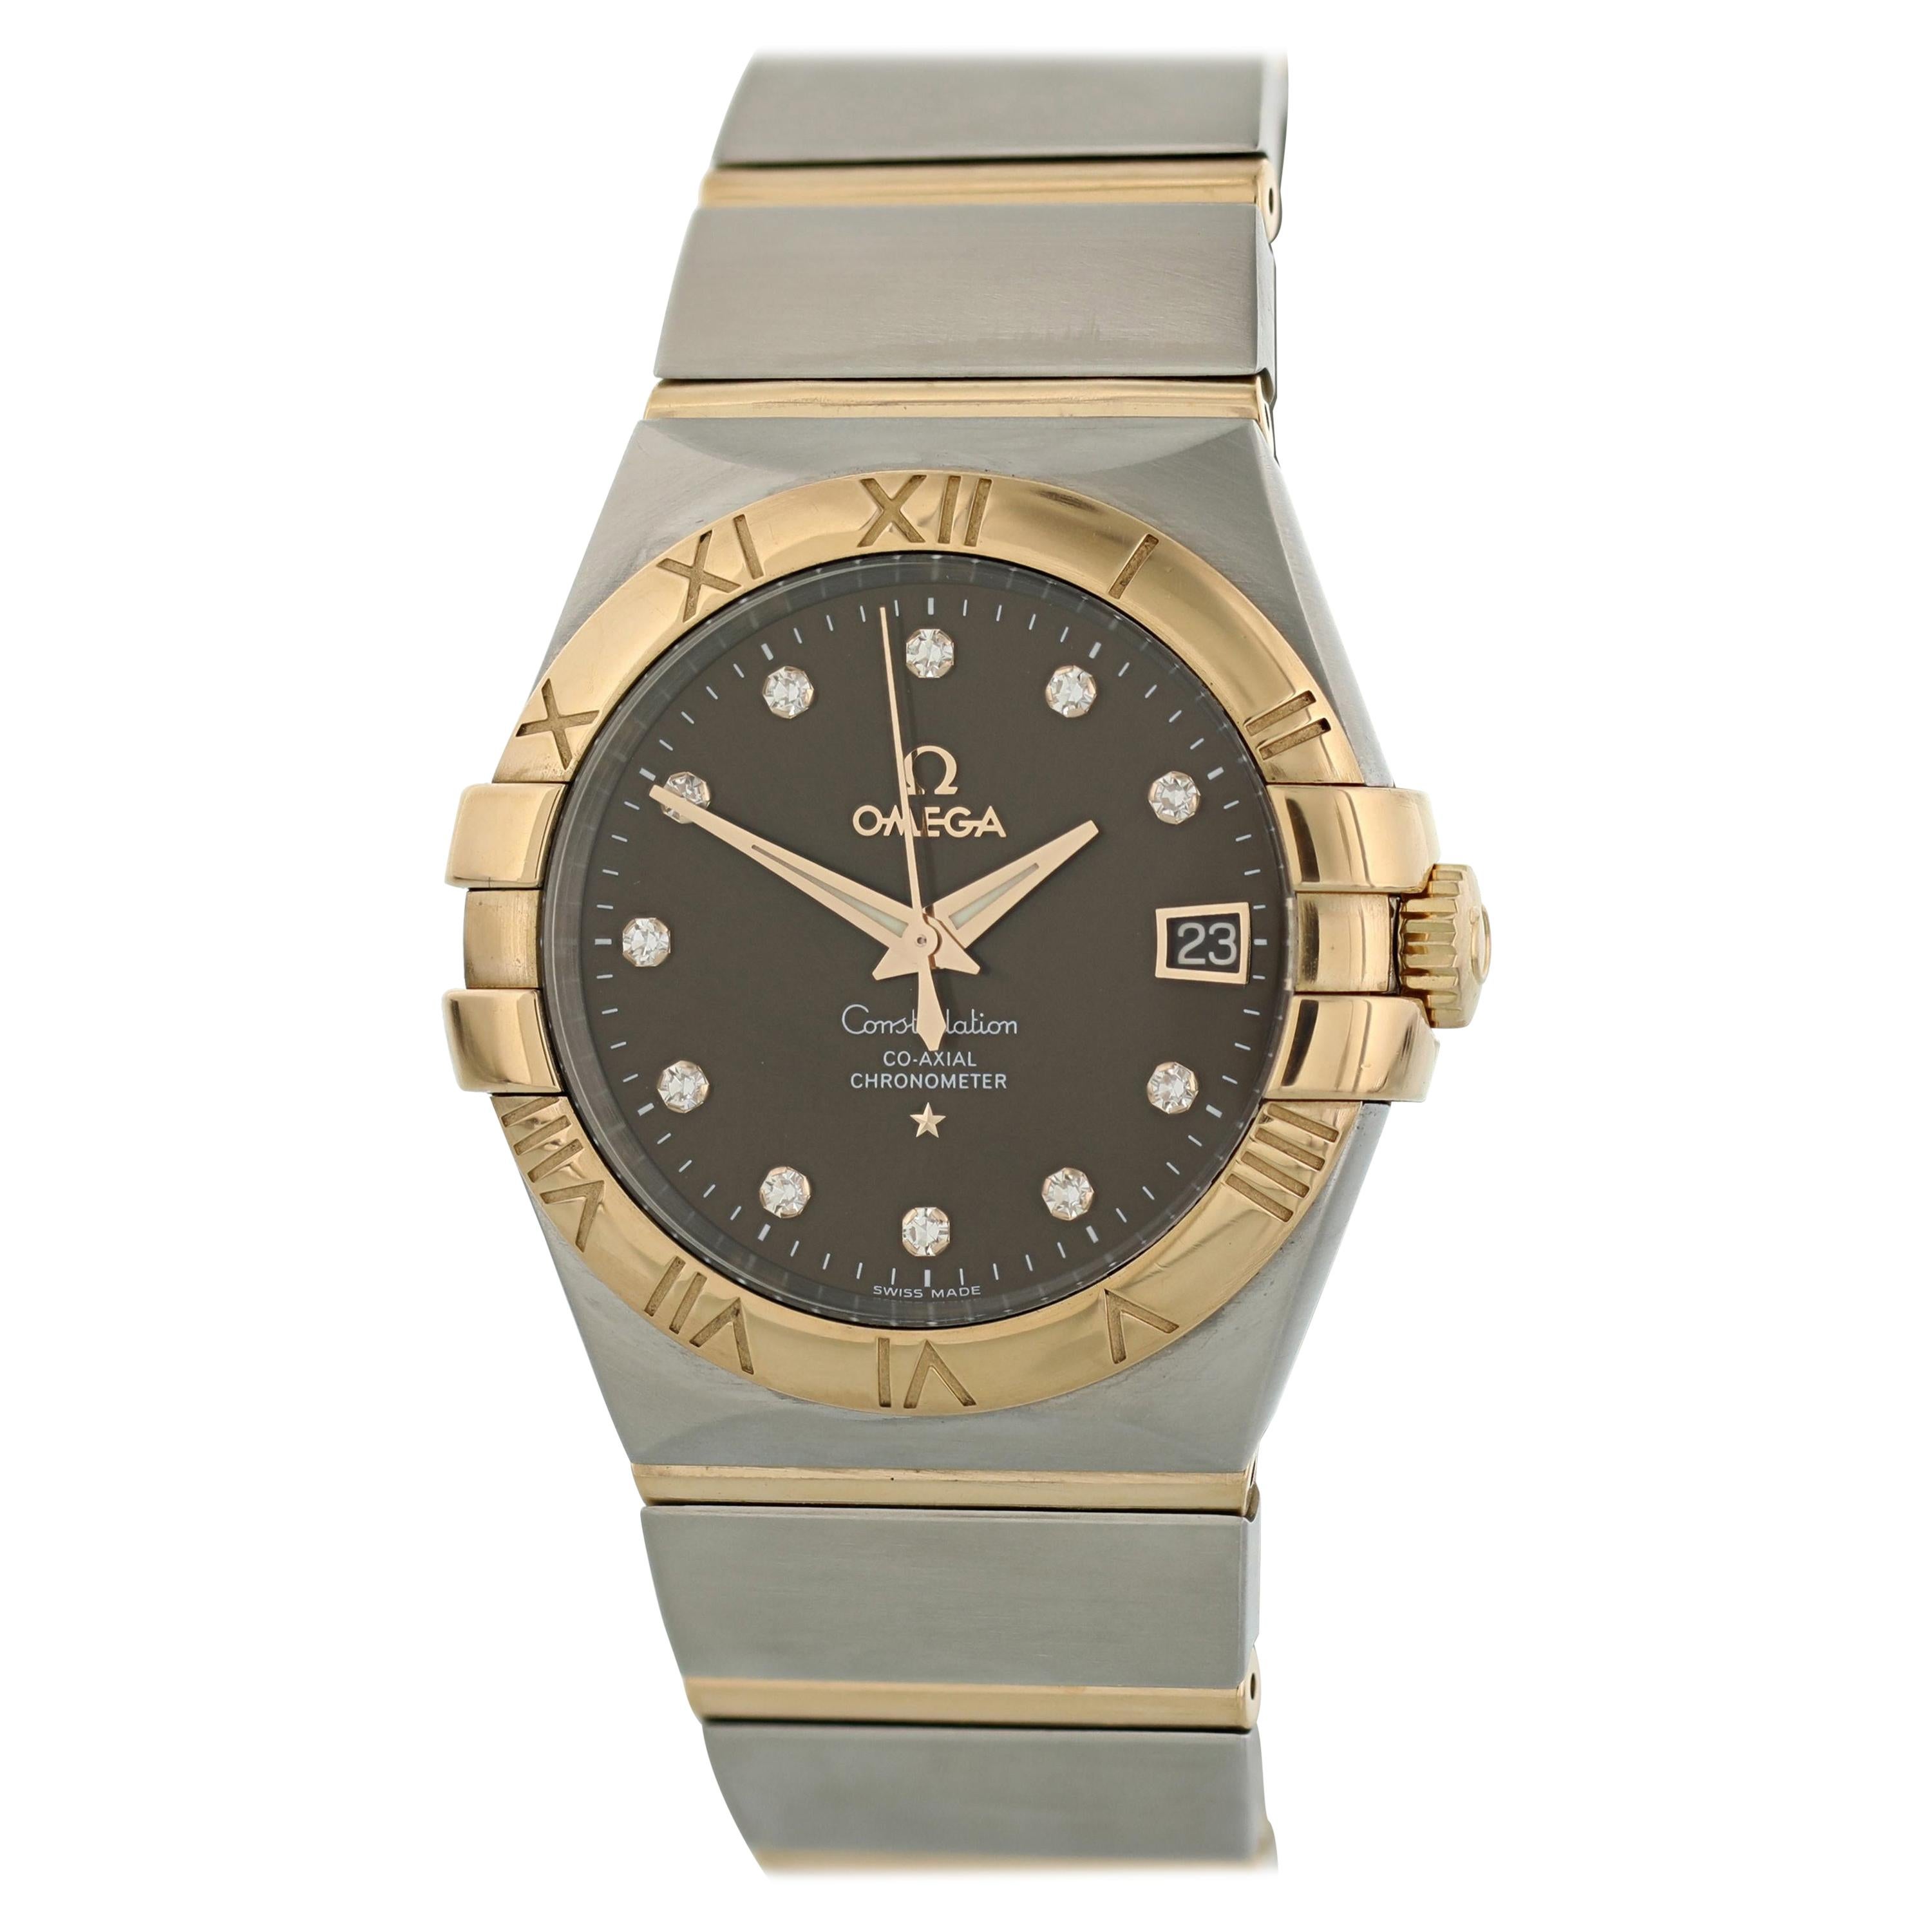 Omega Constellation 123.20.38.21.63.001 Co-Axial Chronometer Men's Watch For Sale